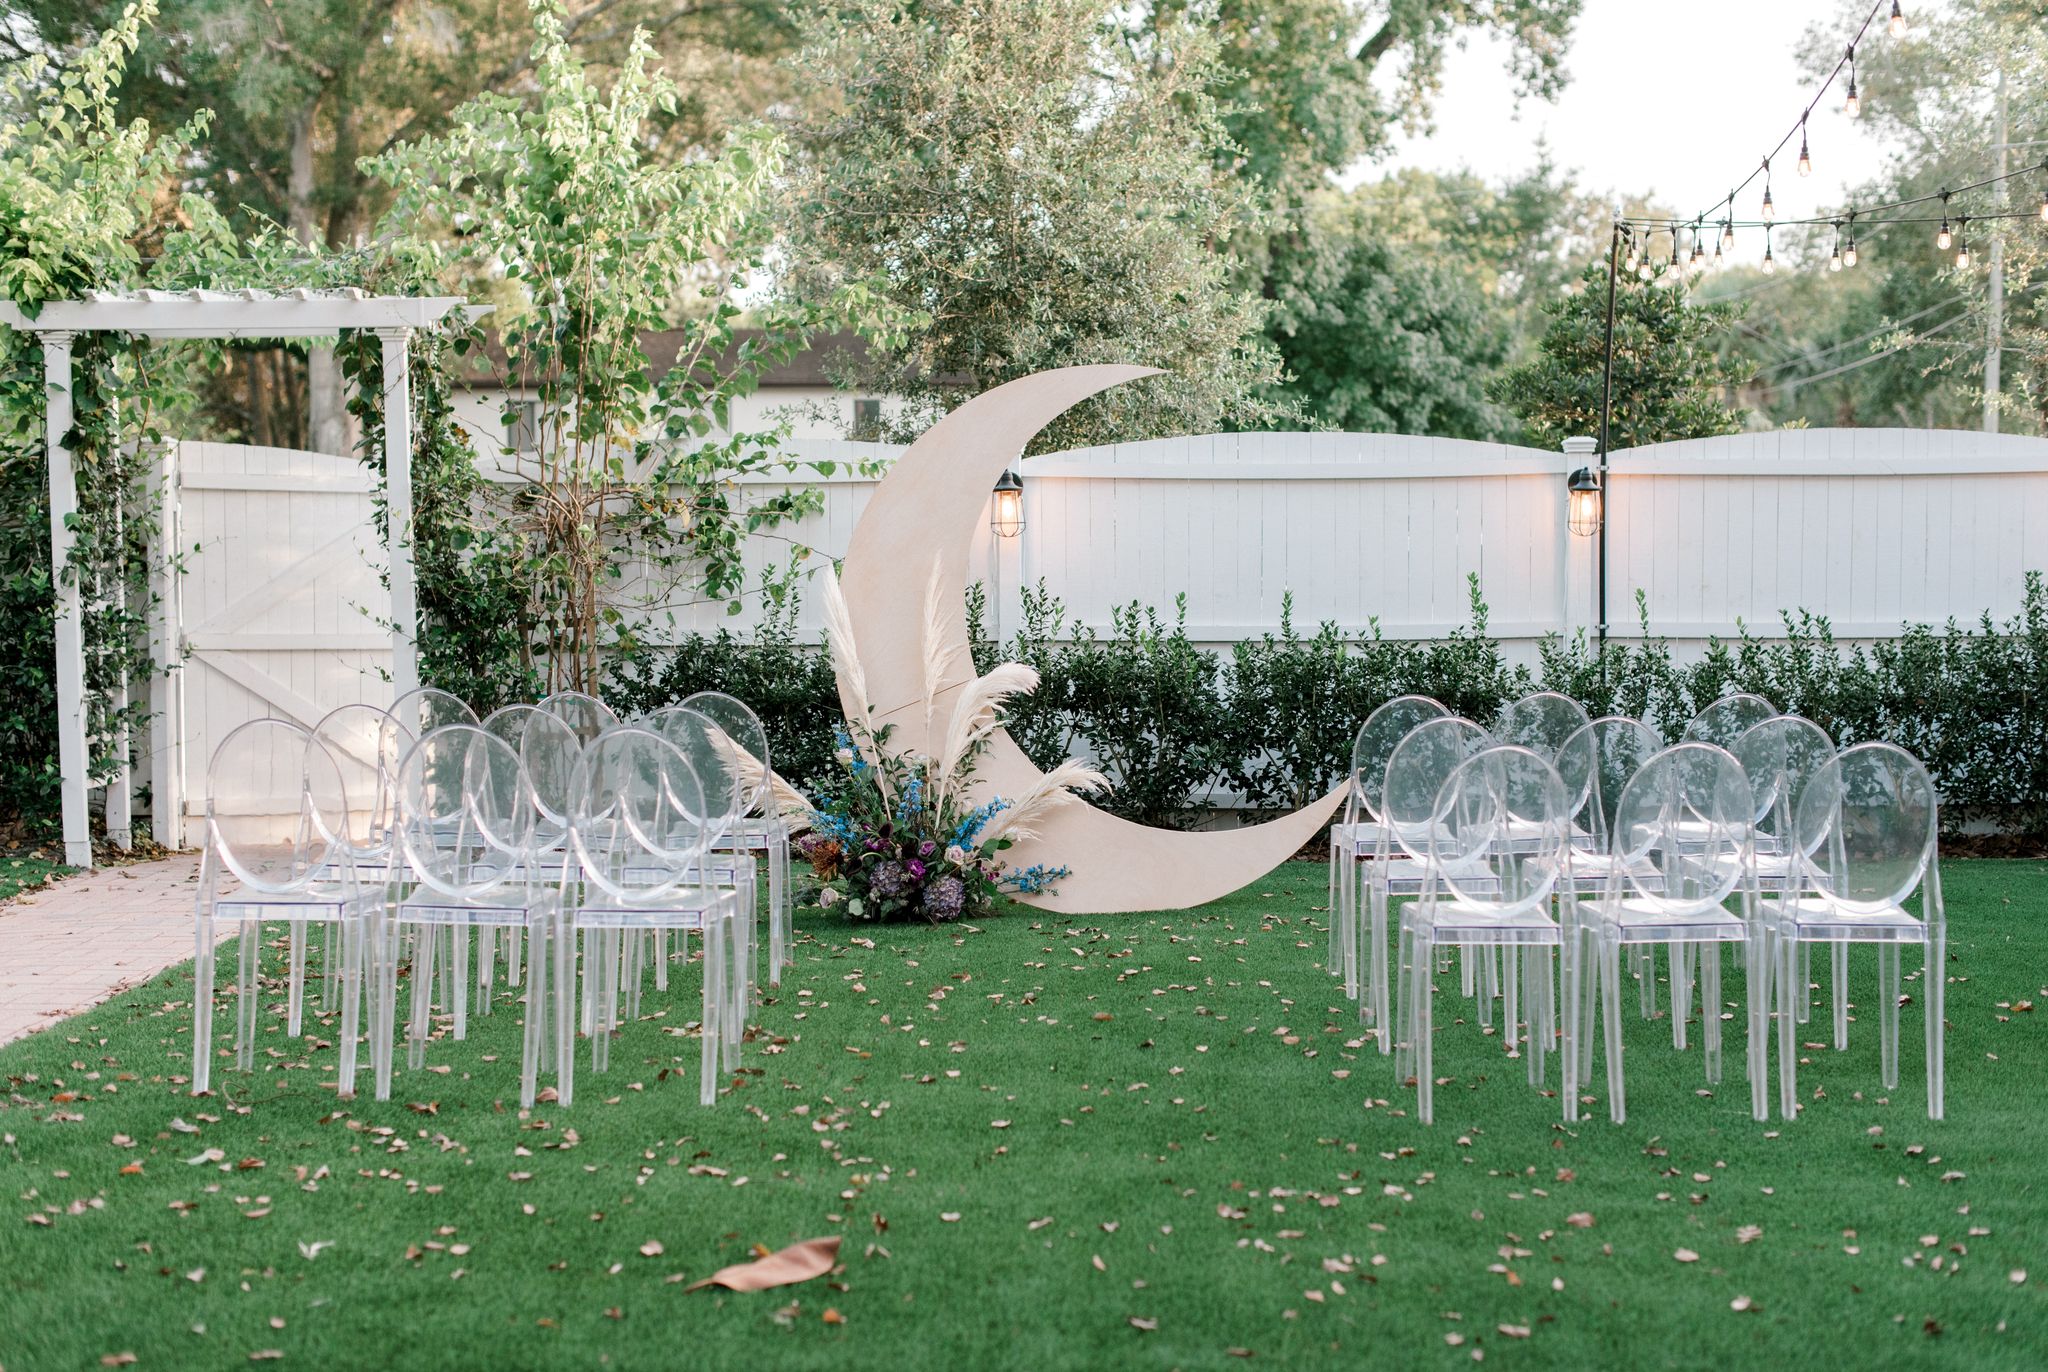 moon shaped arch on green lawn with clear chairs set up for wedding ceremony space in front of white fence